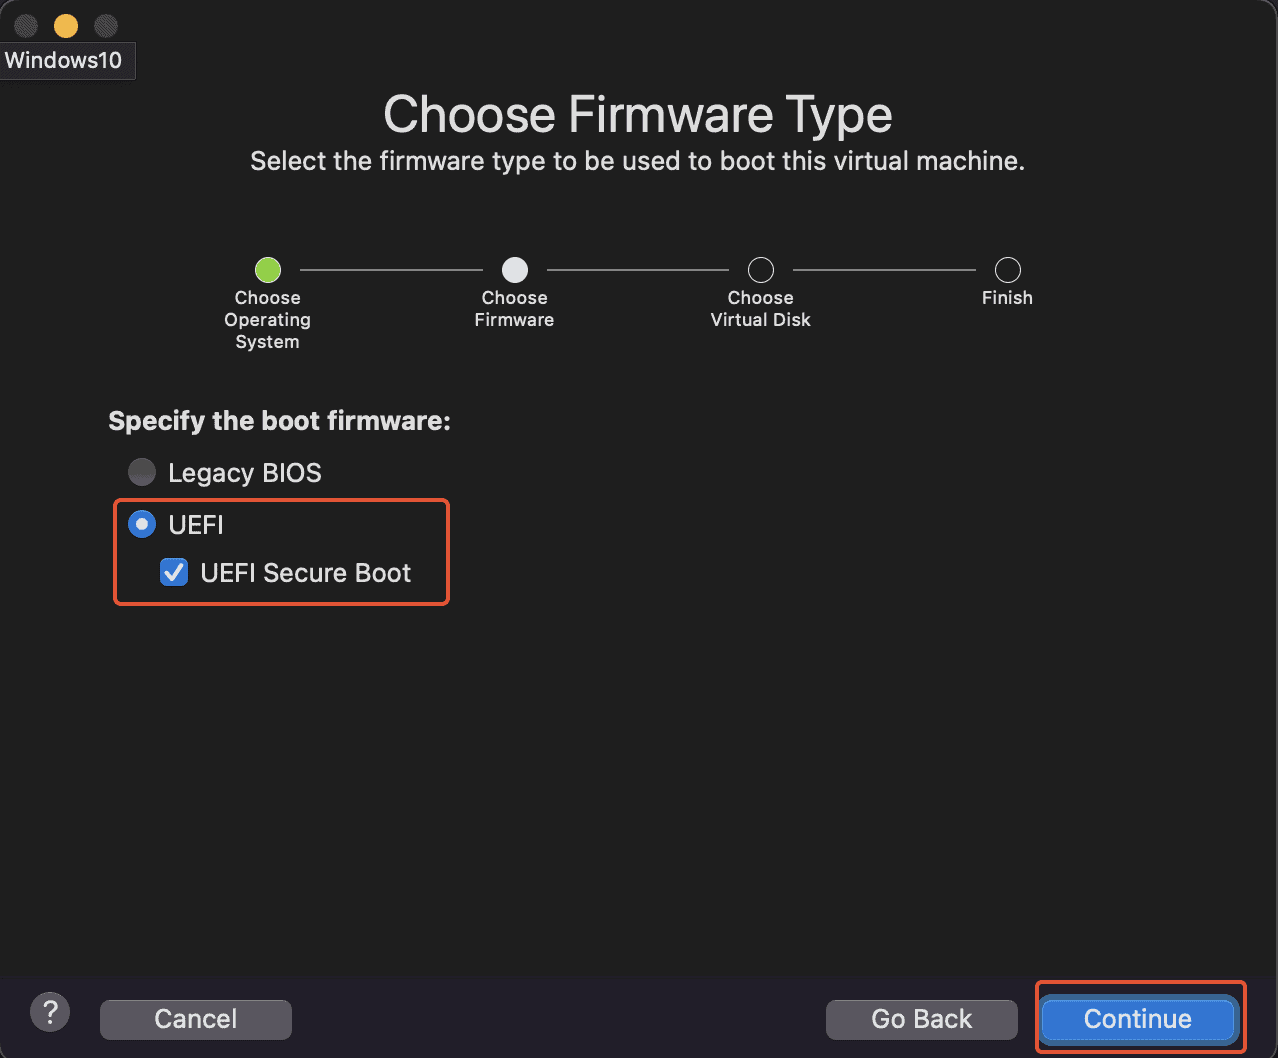 Choose Firmware Type to Boot the Virtual Machine